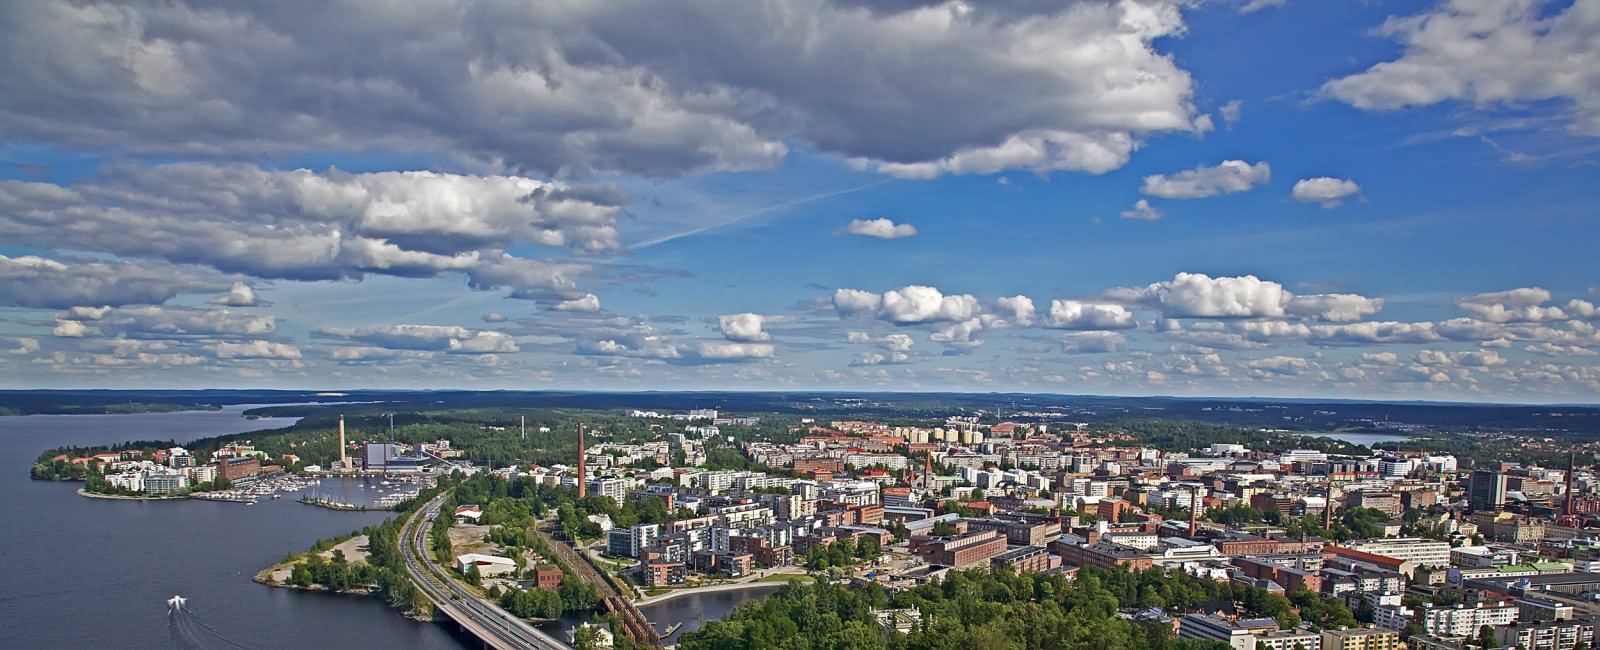 Tampere City View From The  Nasinneula